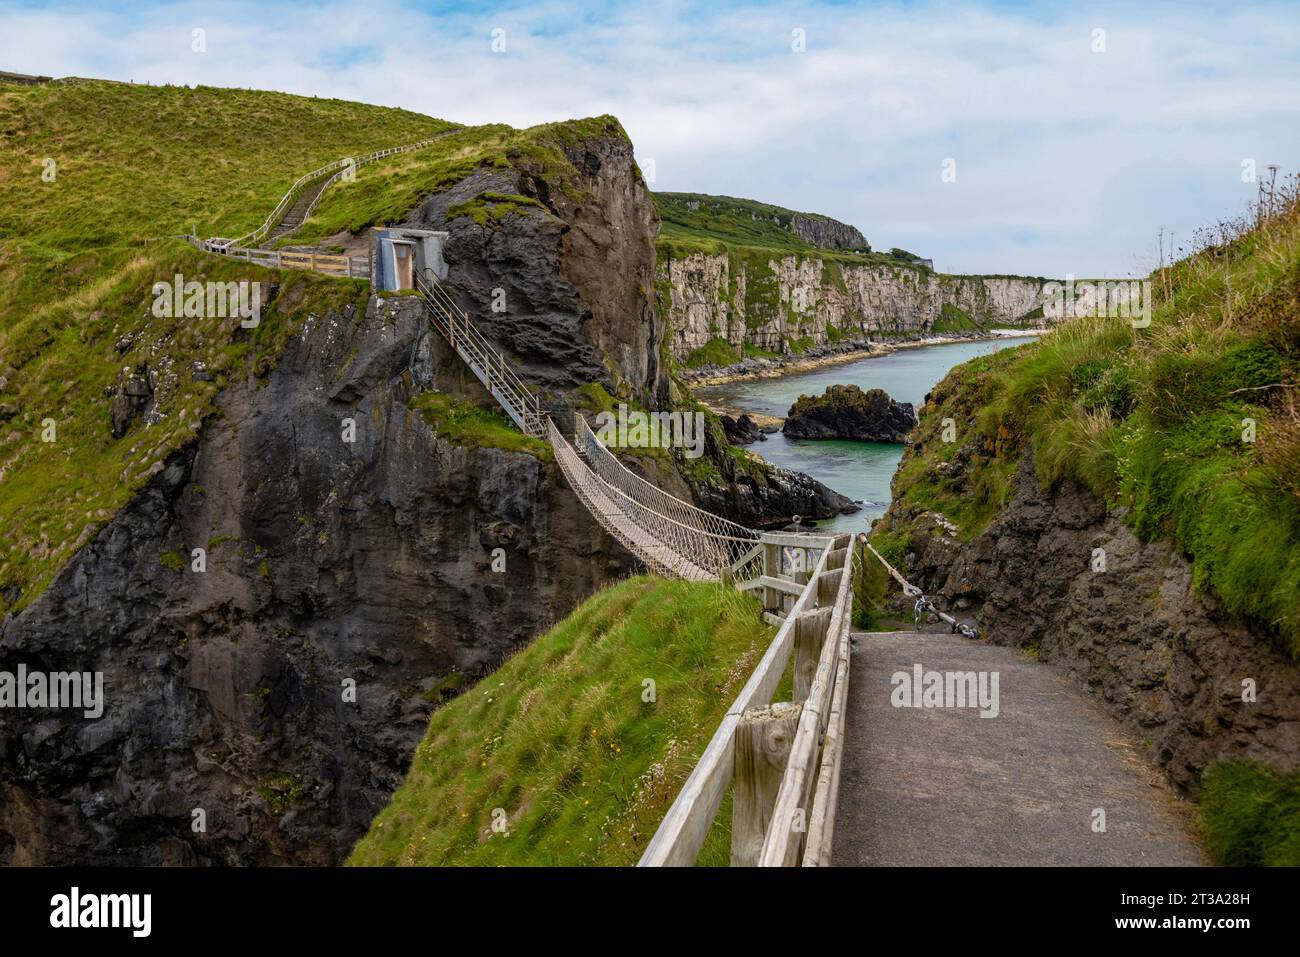 Carrick-a-Rede Rope Bridge, Northern Ireland is a 20-metre-long rope bridge spanning a 30-metre chasm, connecting the mainland to the tiny island of C Stock Photo